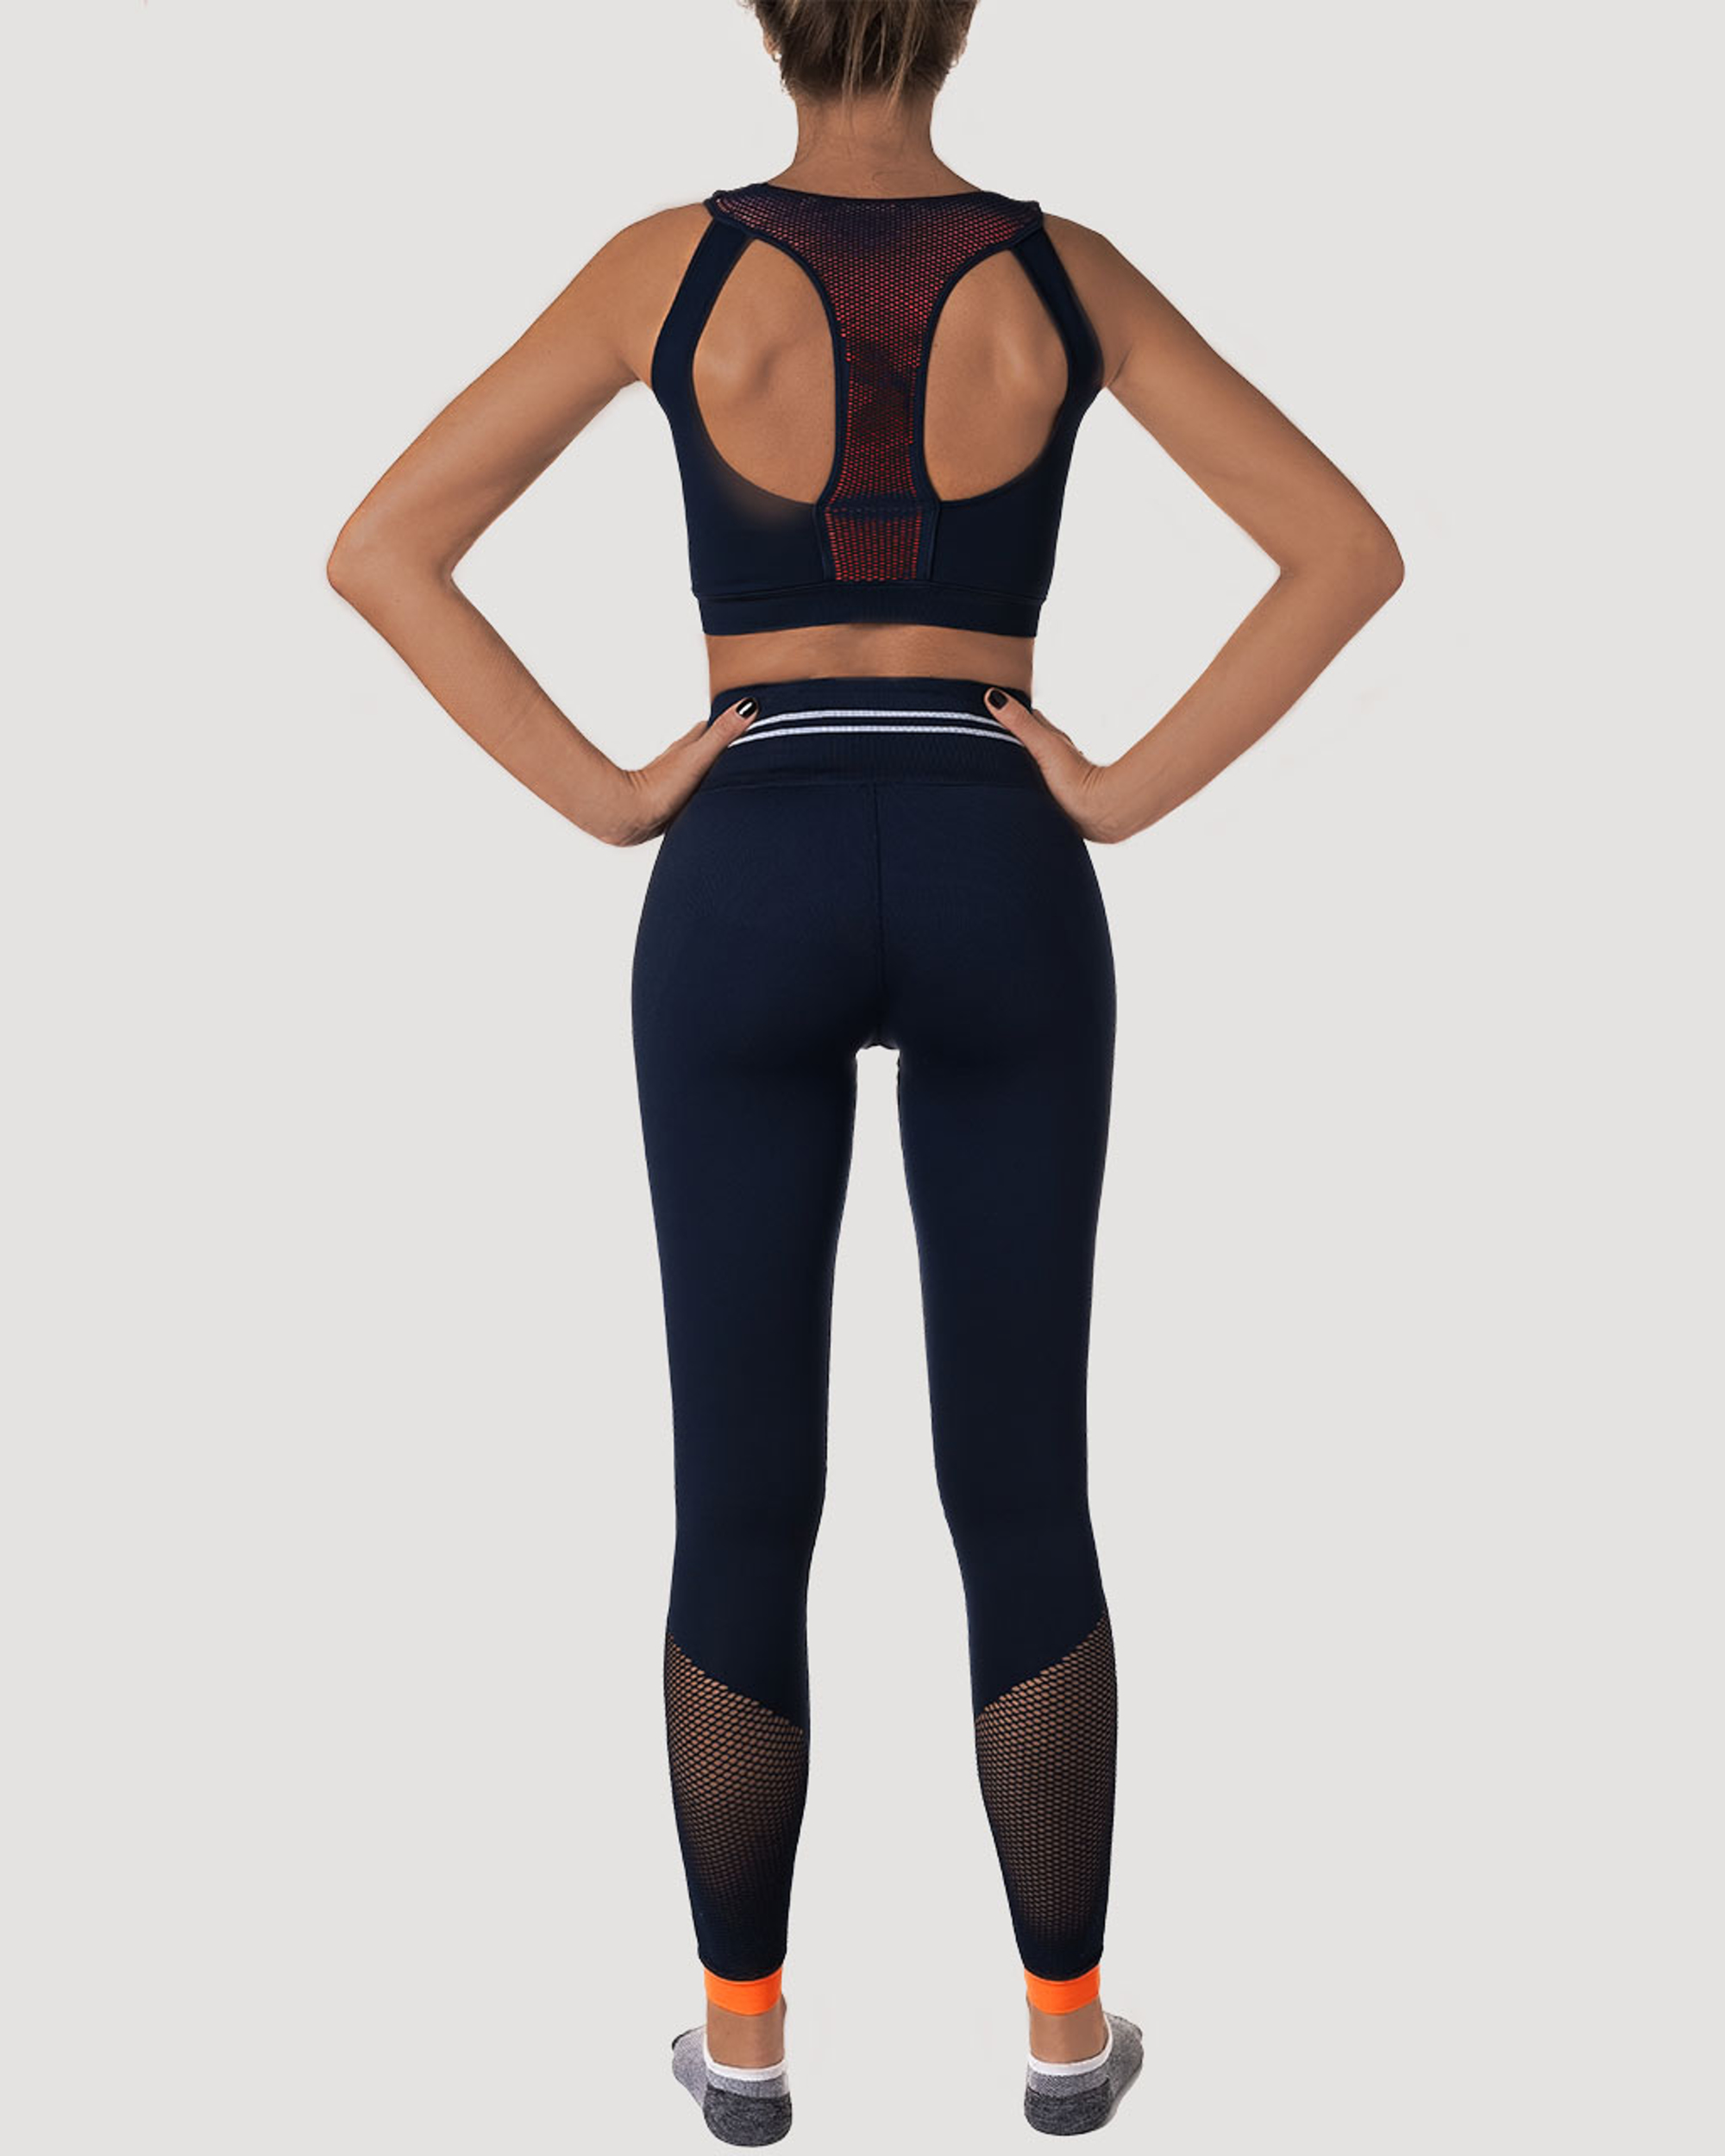 YOGA OUTFIT NO SEAMS The perfect yoga or pilates outfit. No